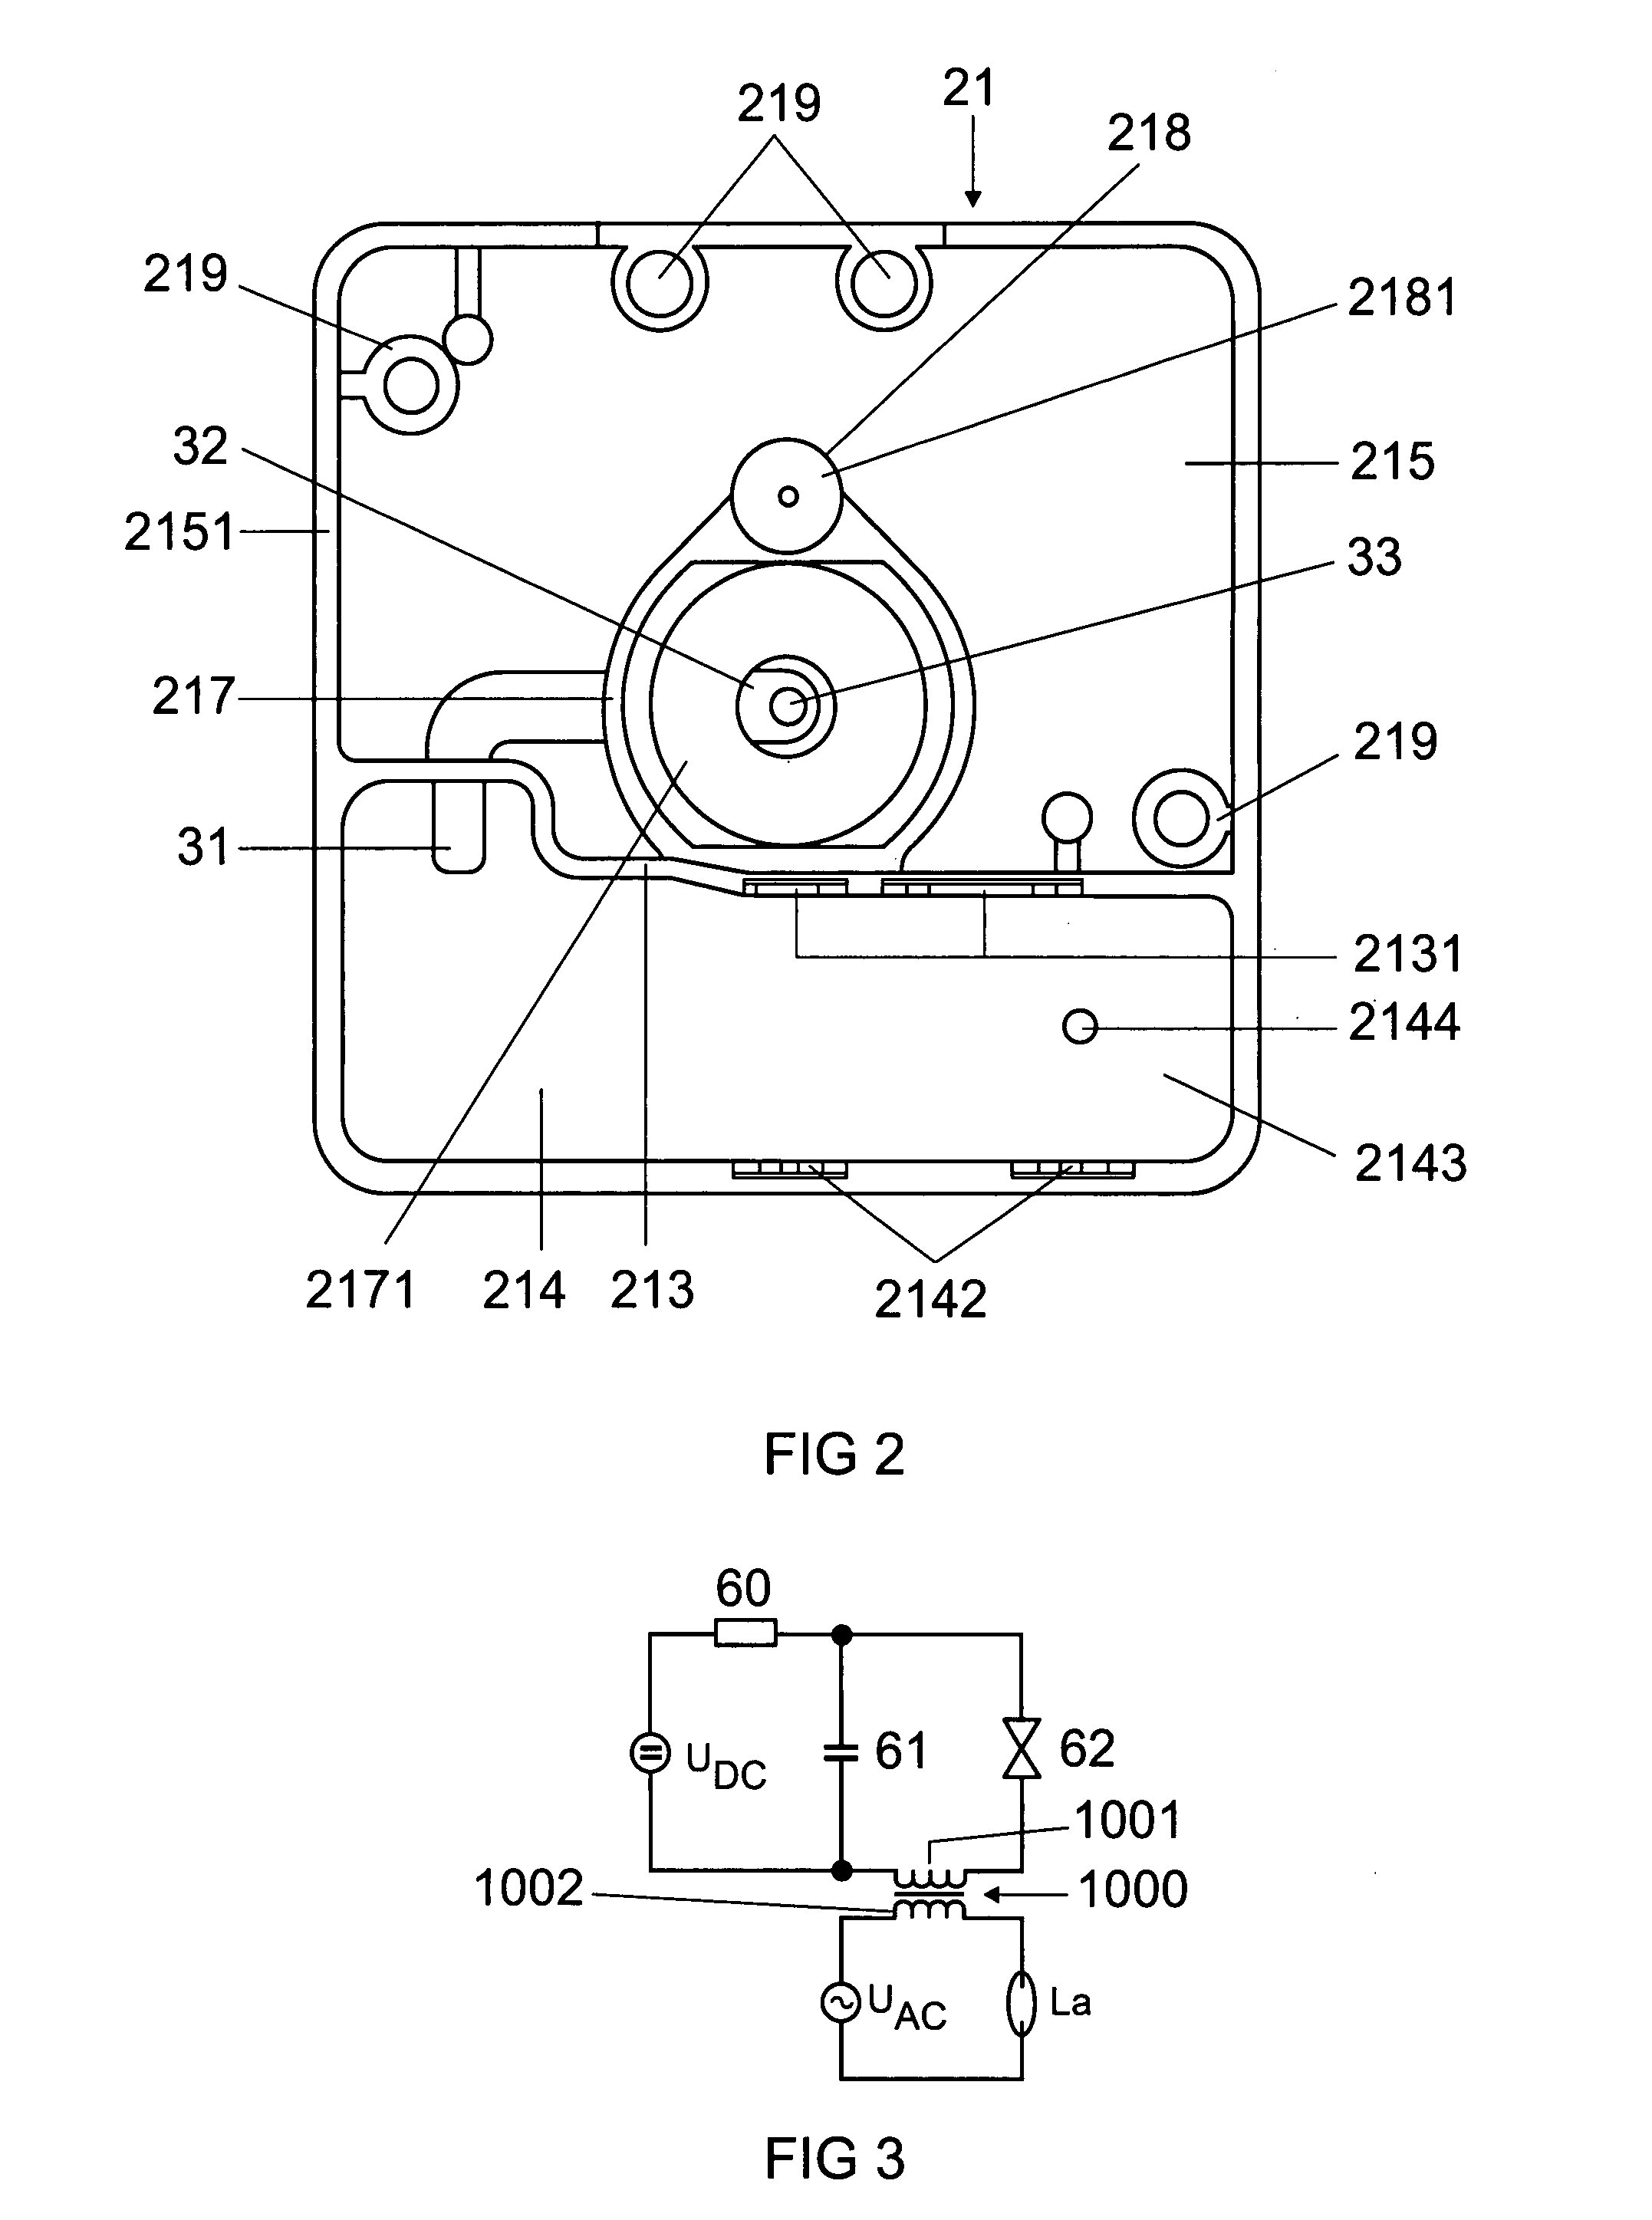 Lamp Base for a High-Pressure Discharge Lamp and Corresponding High-Pressure Discharge Lamp